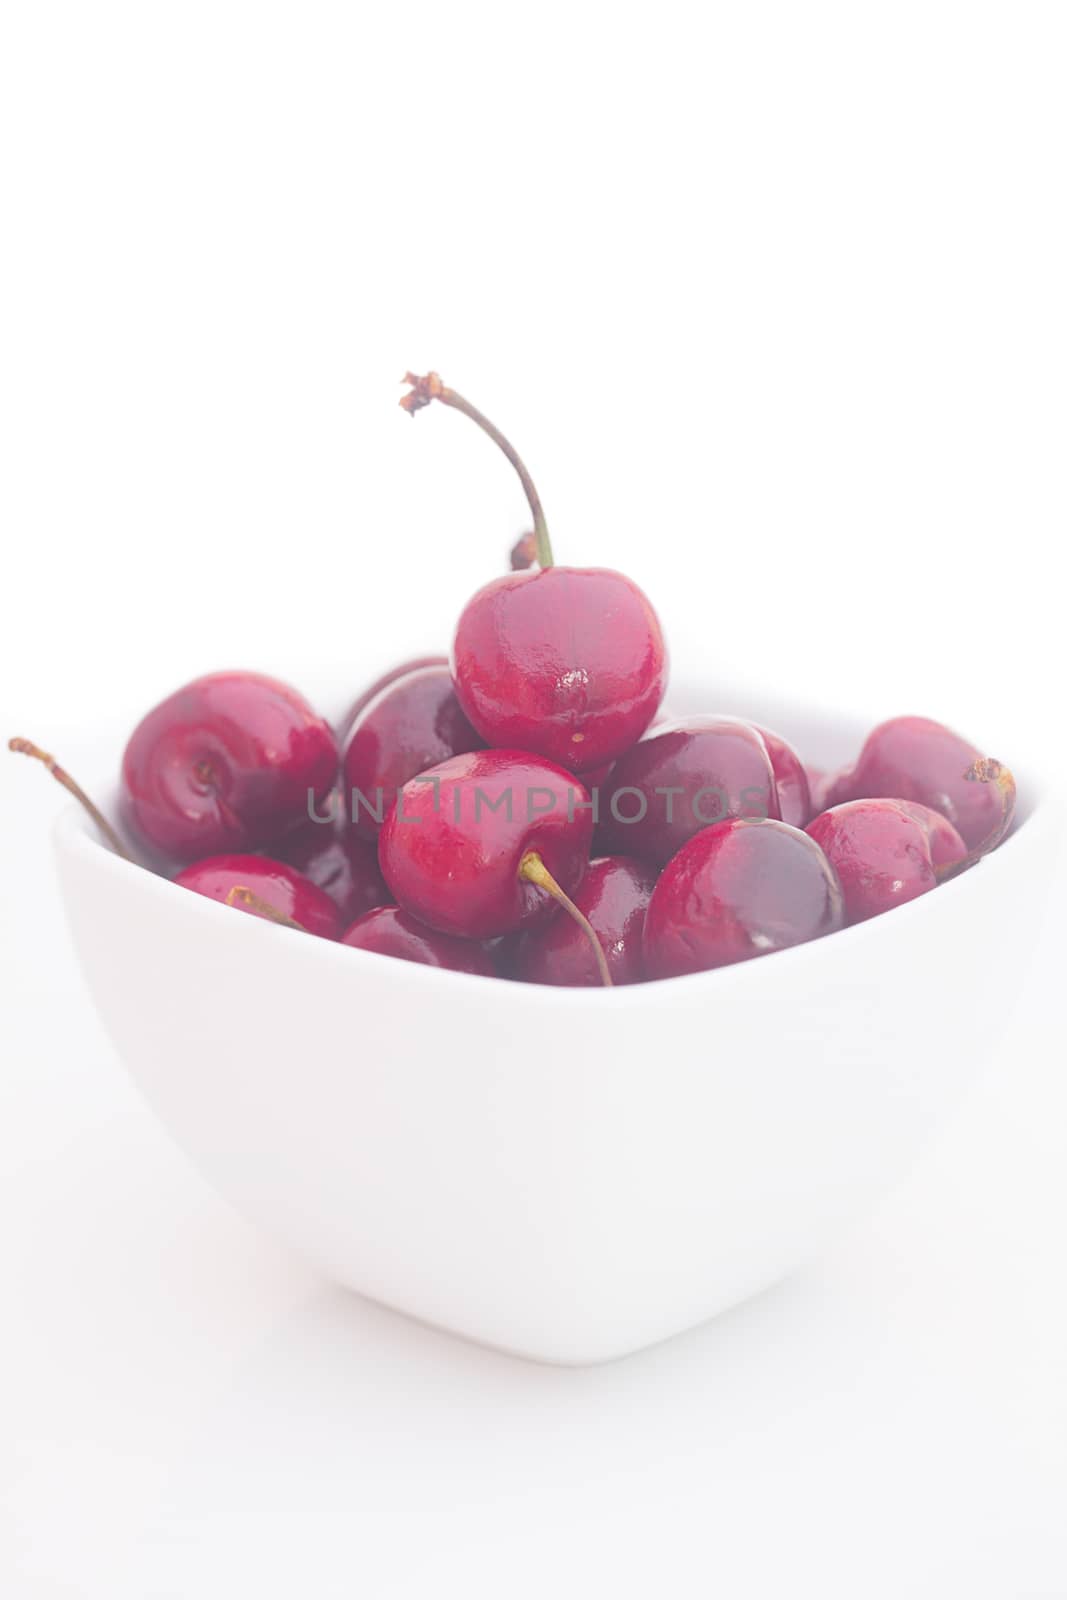 Cherries  in white bowl isolated on white by jannyjus